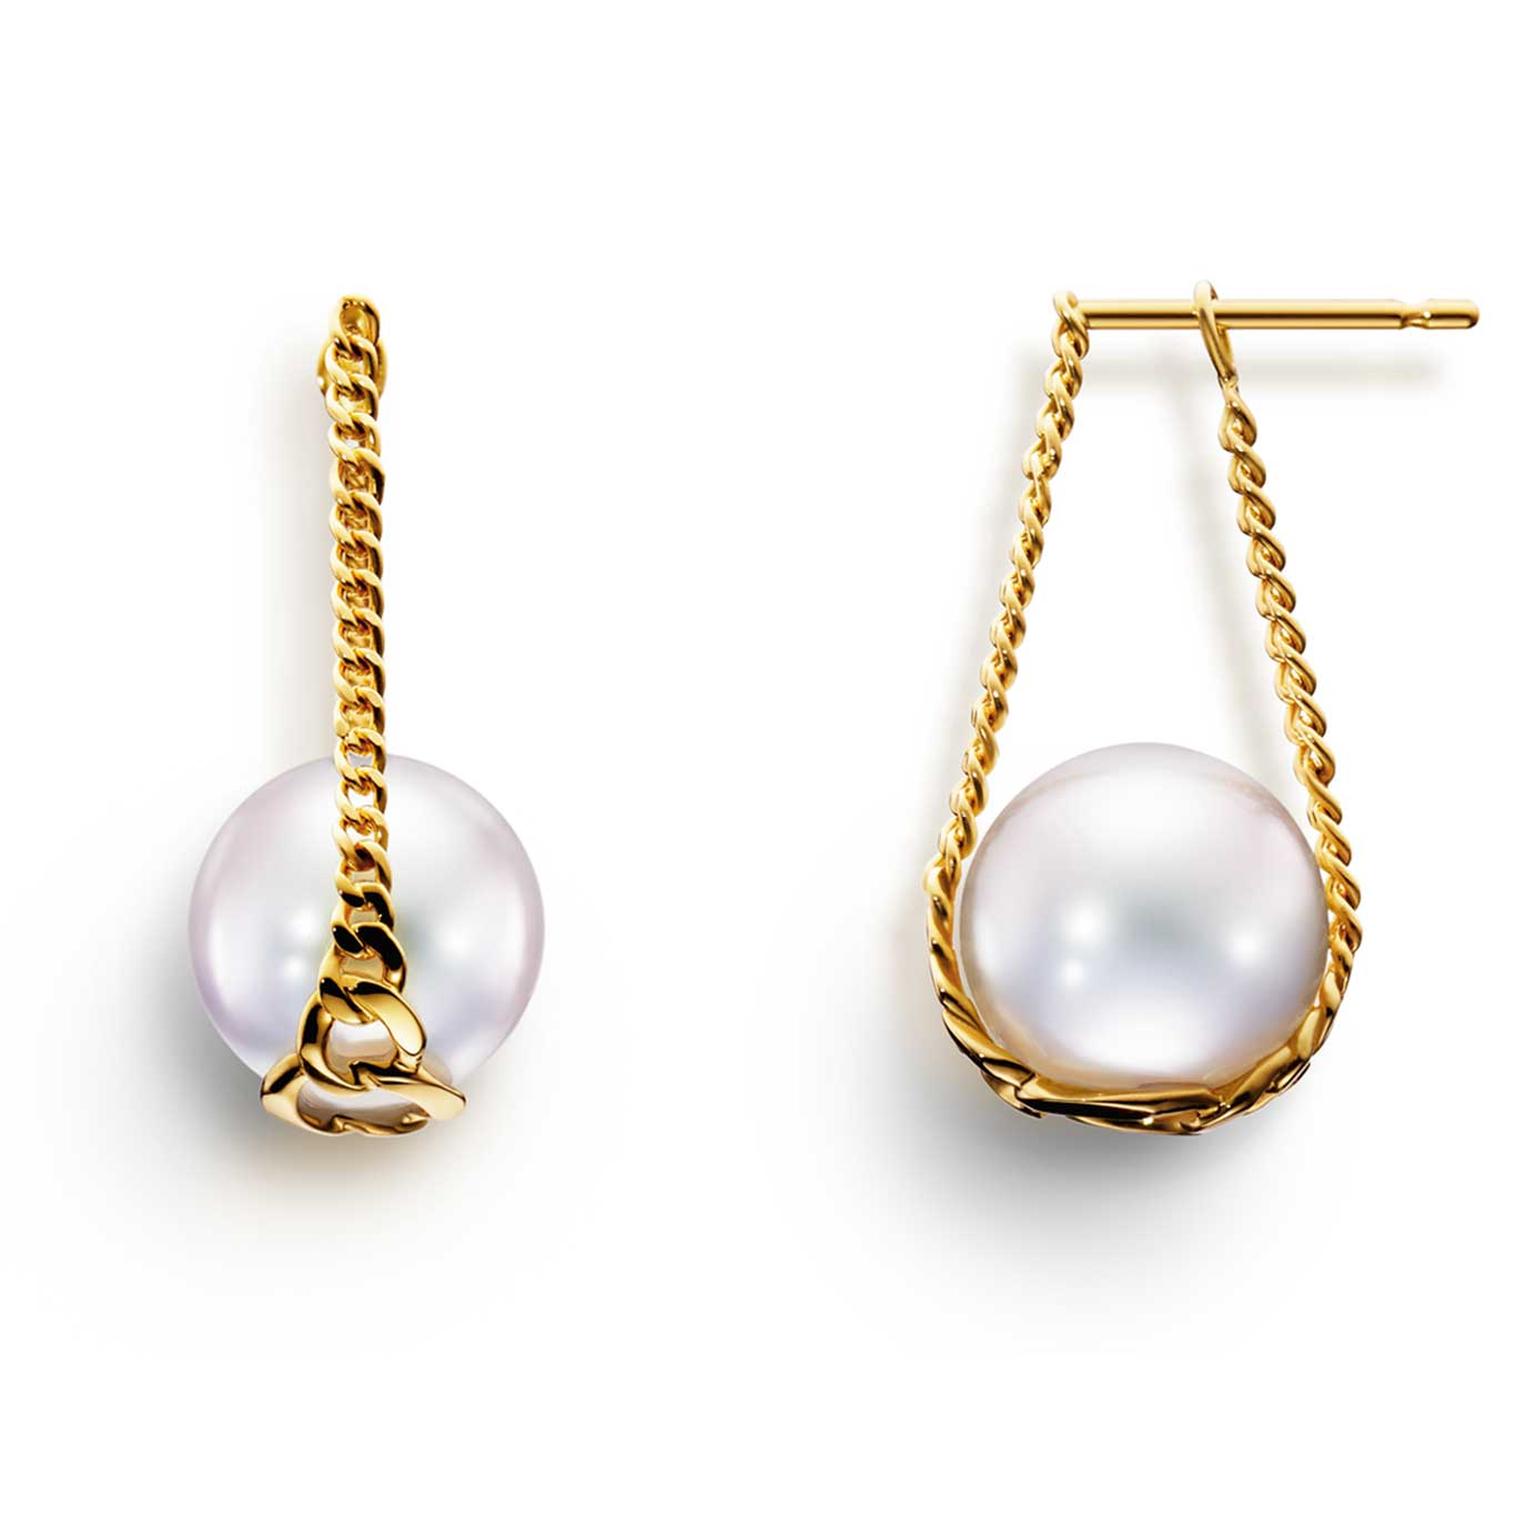 M/G Tasaki Stretched earrings with freshwater pearls